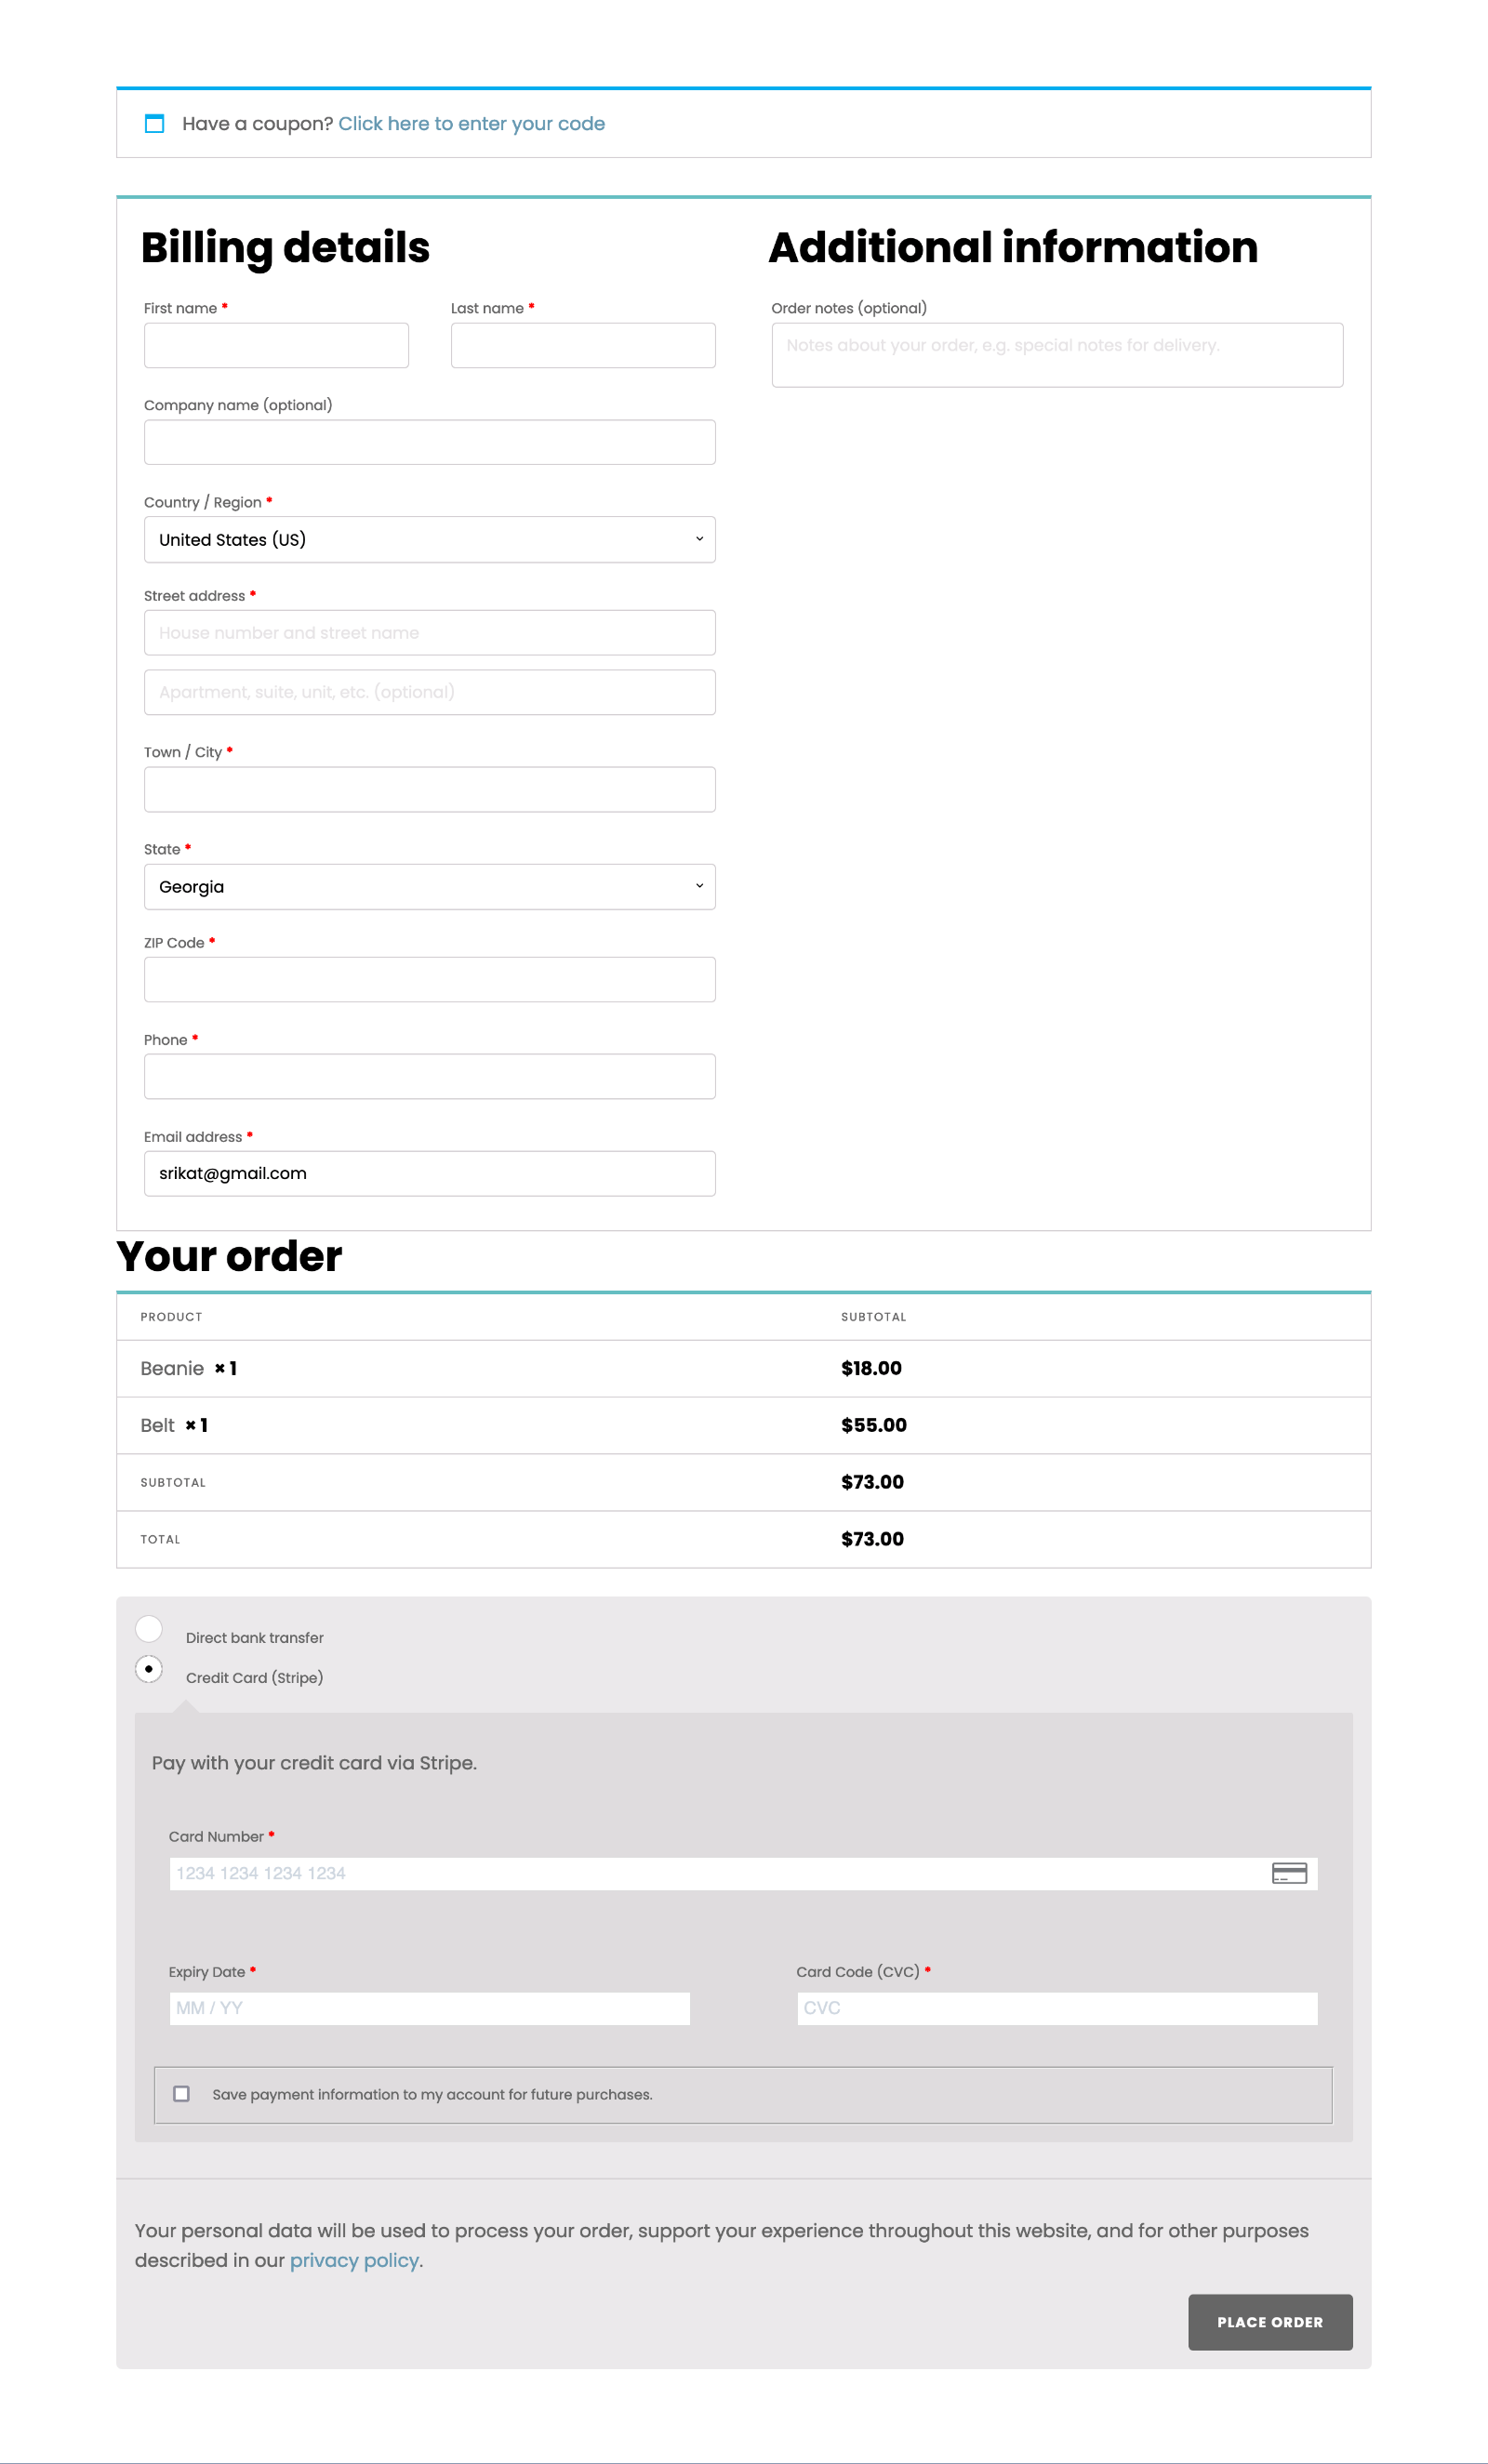 https://wpdevdesign.com/wp-content/uploads/2021/11/woocommerce-checkout-columns-layout-before.png